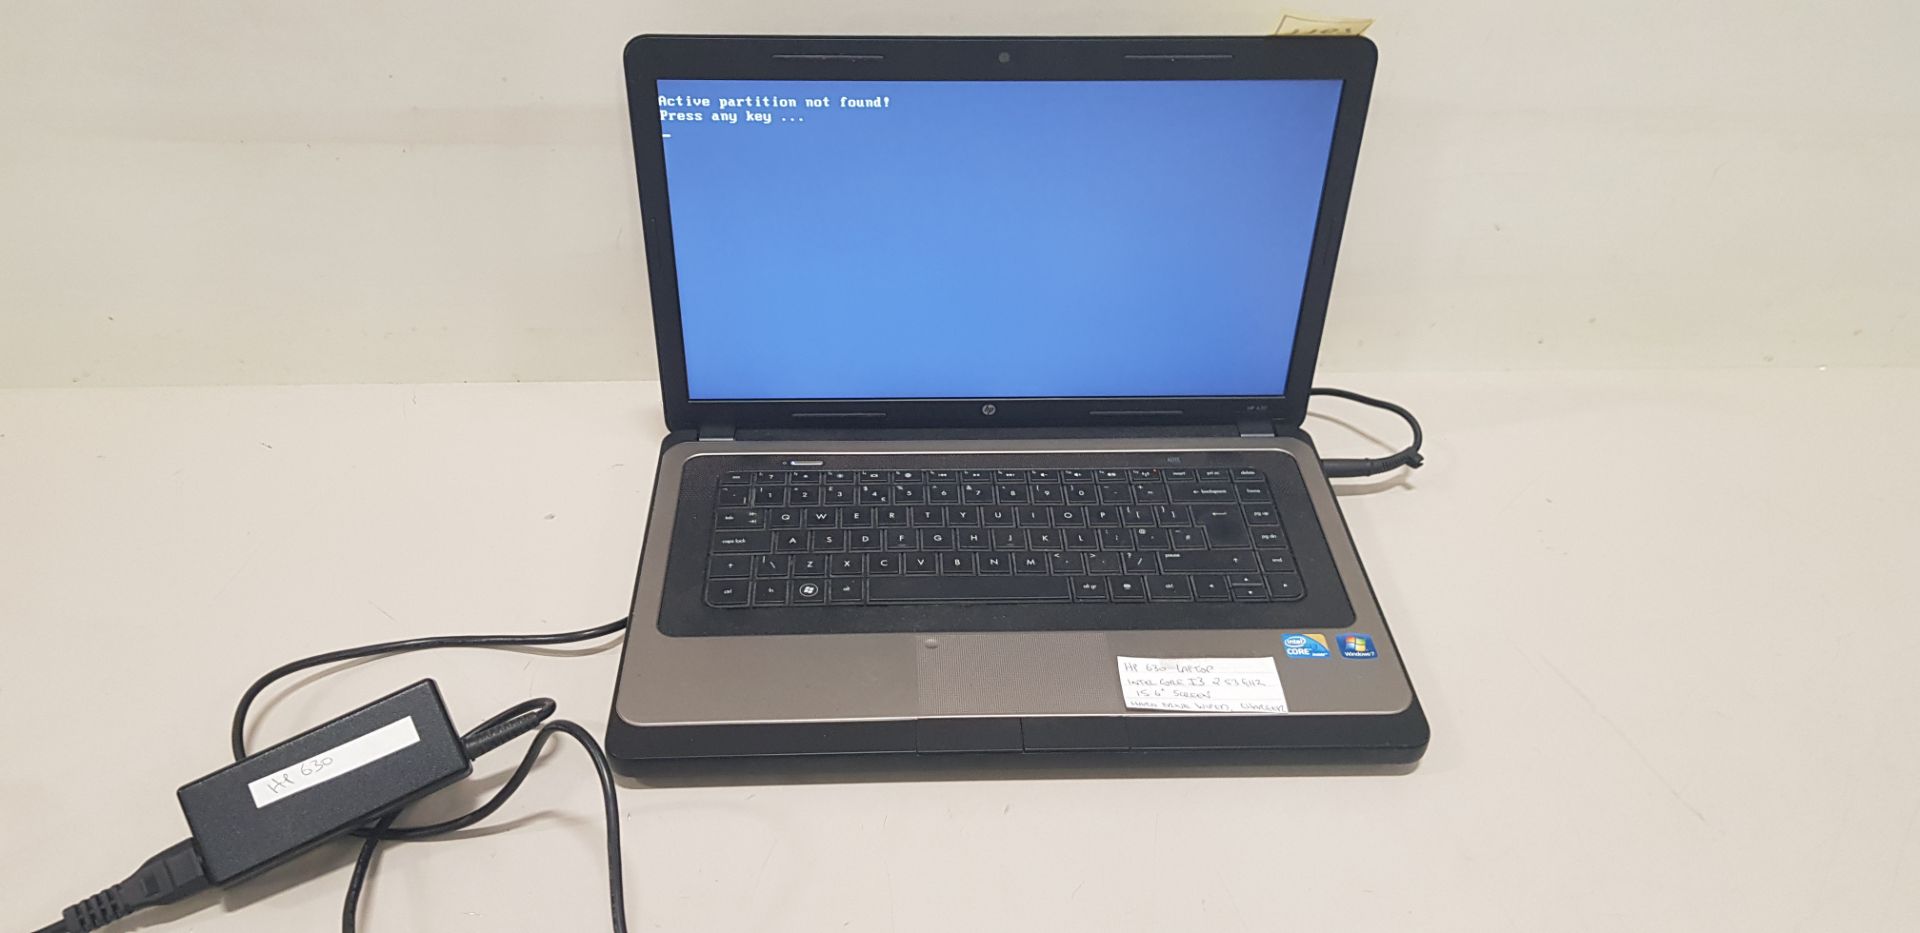 1 X HP 630 LAPTOP INTEL CORE I3 2.53 GHZ , 15.6 SCREEN - HARD DRIVE WIPED - NO OS - COMES WITH